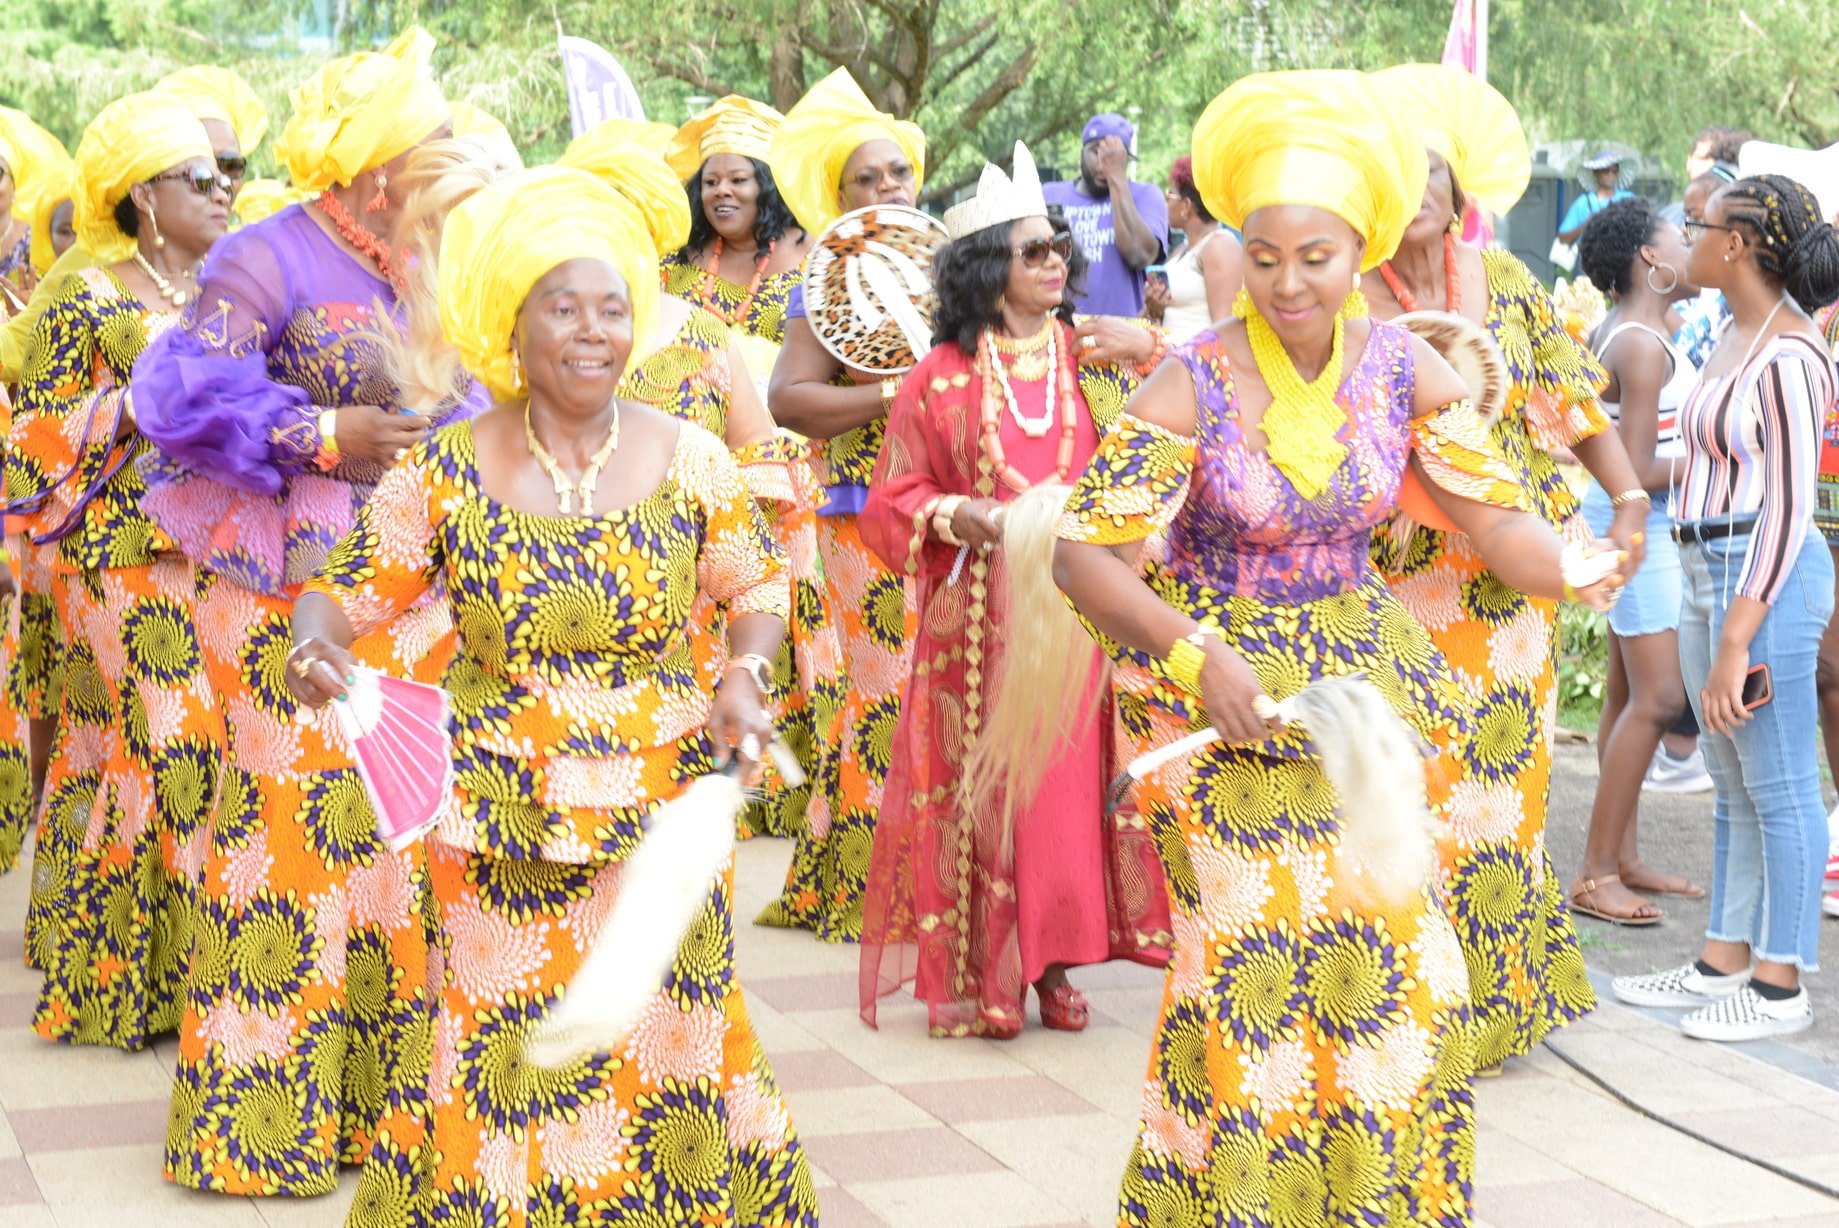 Women wearing traditional Nigerian outfits dance at Igbo Fest at Discovery Green